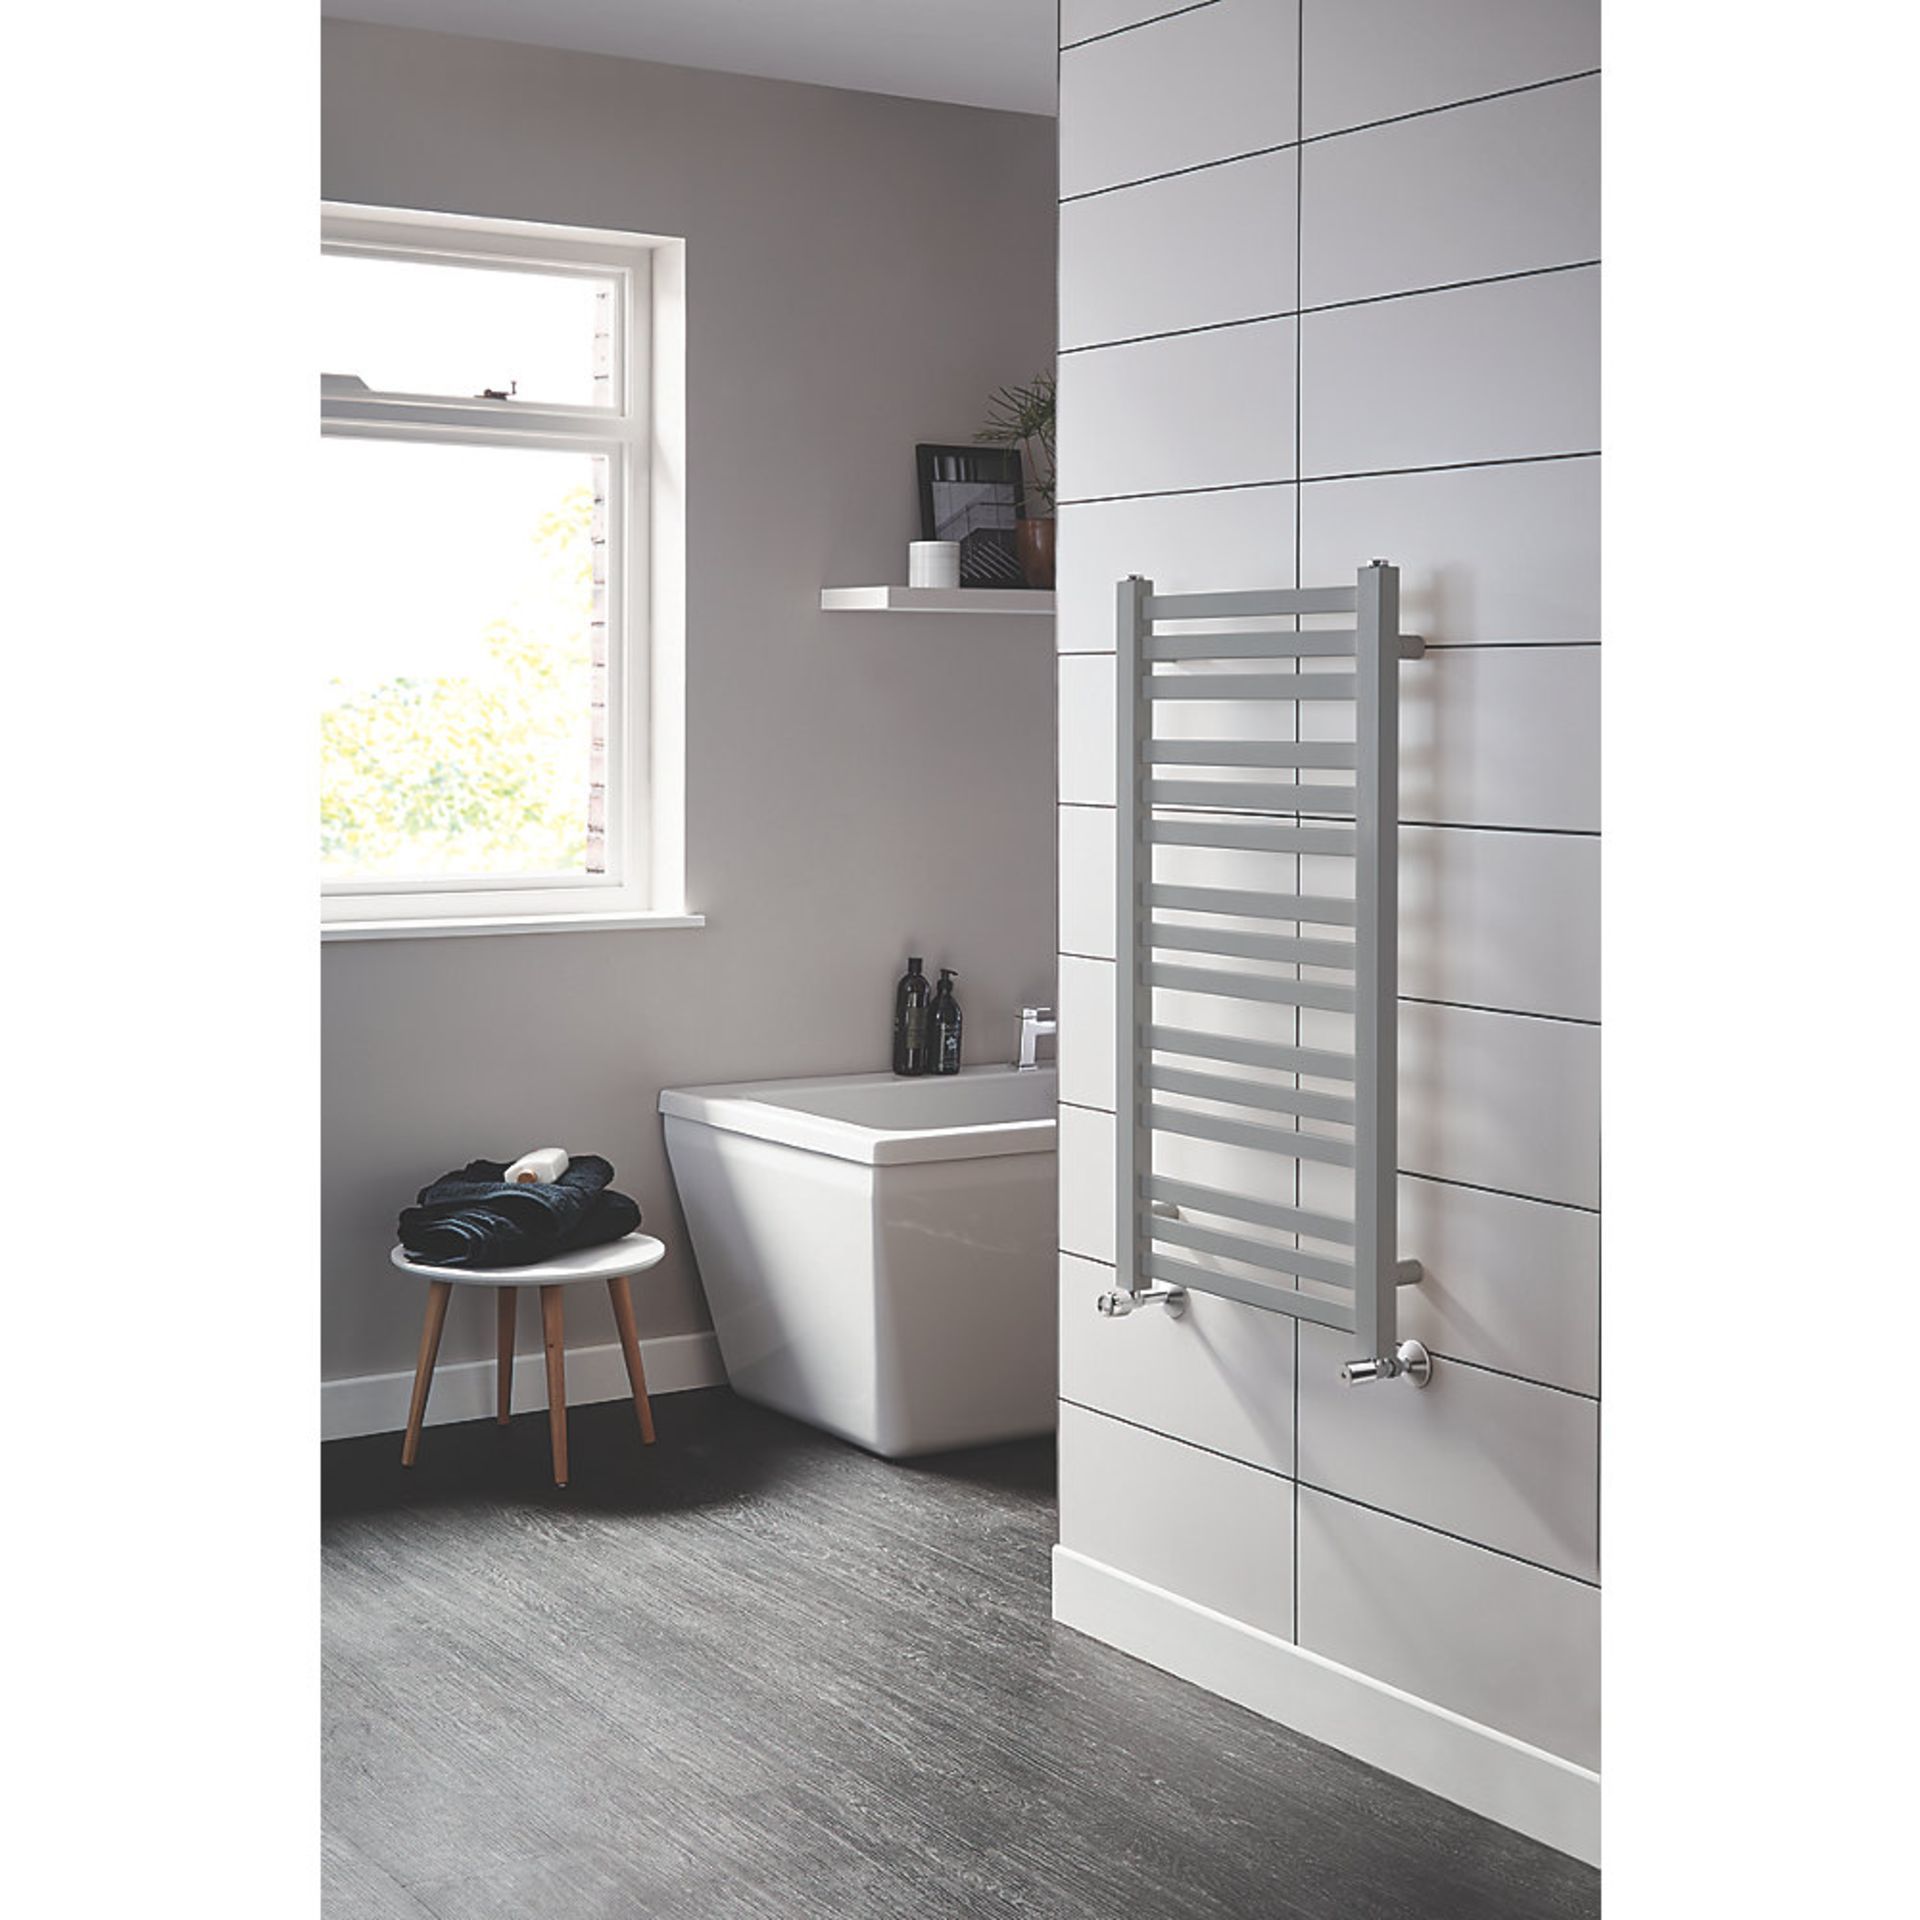 New (H29) 900x500mm Angled Bar Towel Radiator Silver. High Quality Powder-Coated Steel Constru... - Image 2 of 3